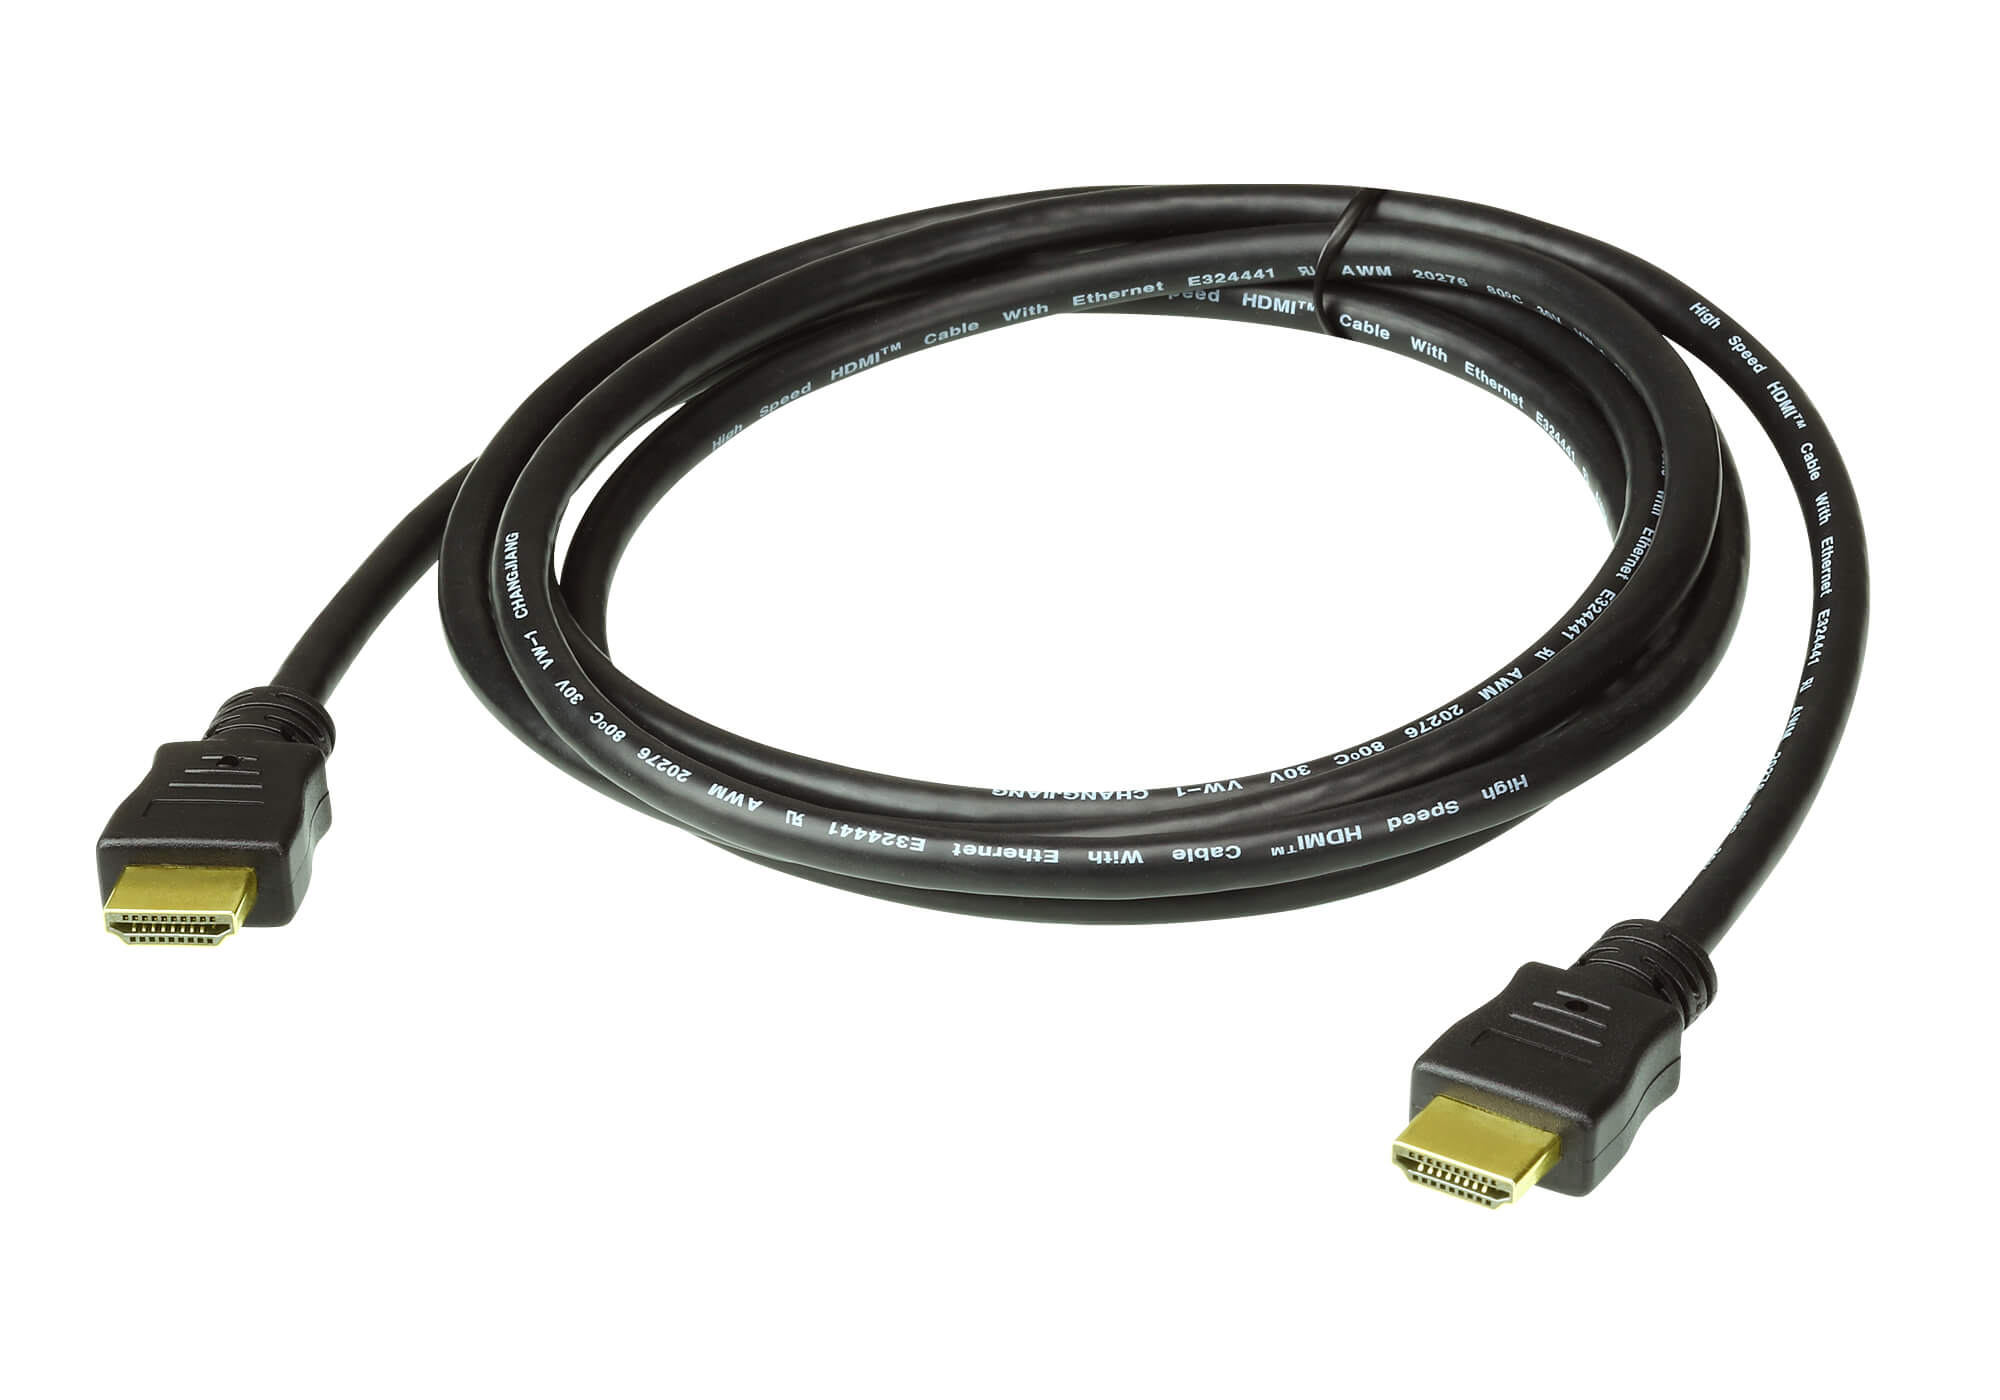 Aten 20m High Speed HDMI Cable with Ethernet, supports up to 4096 x 2160 @ 30Hz, High quality tinned copper wire to with Gold-plated connectors